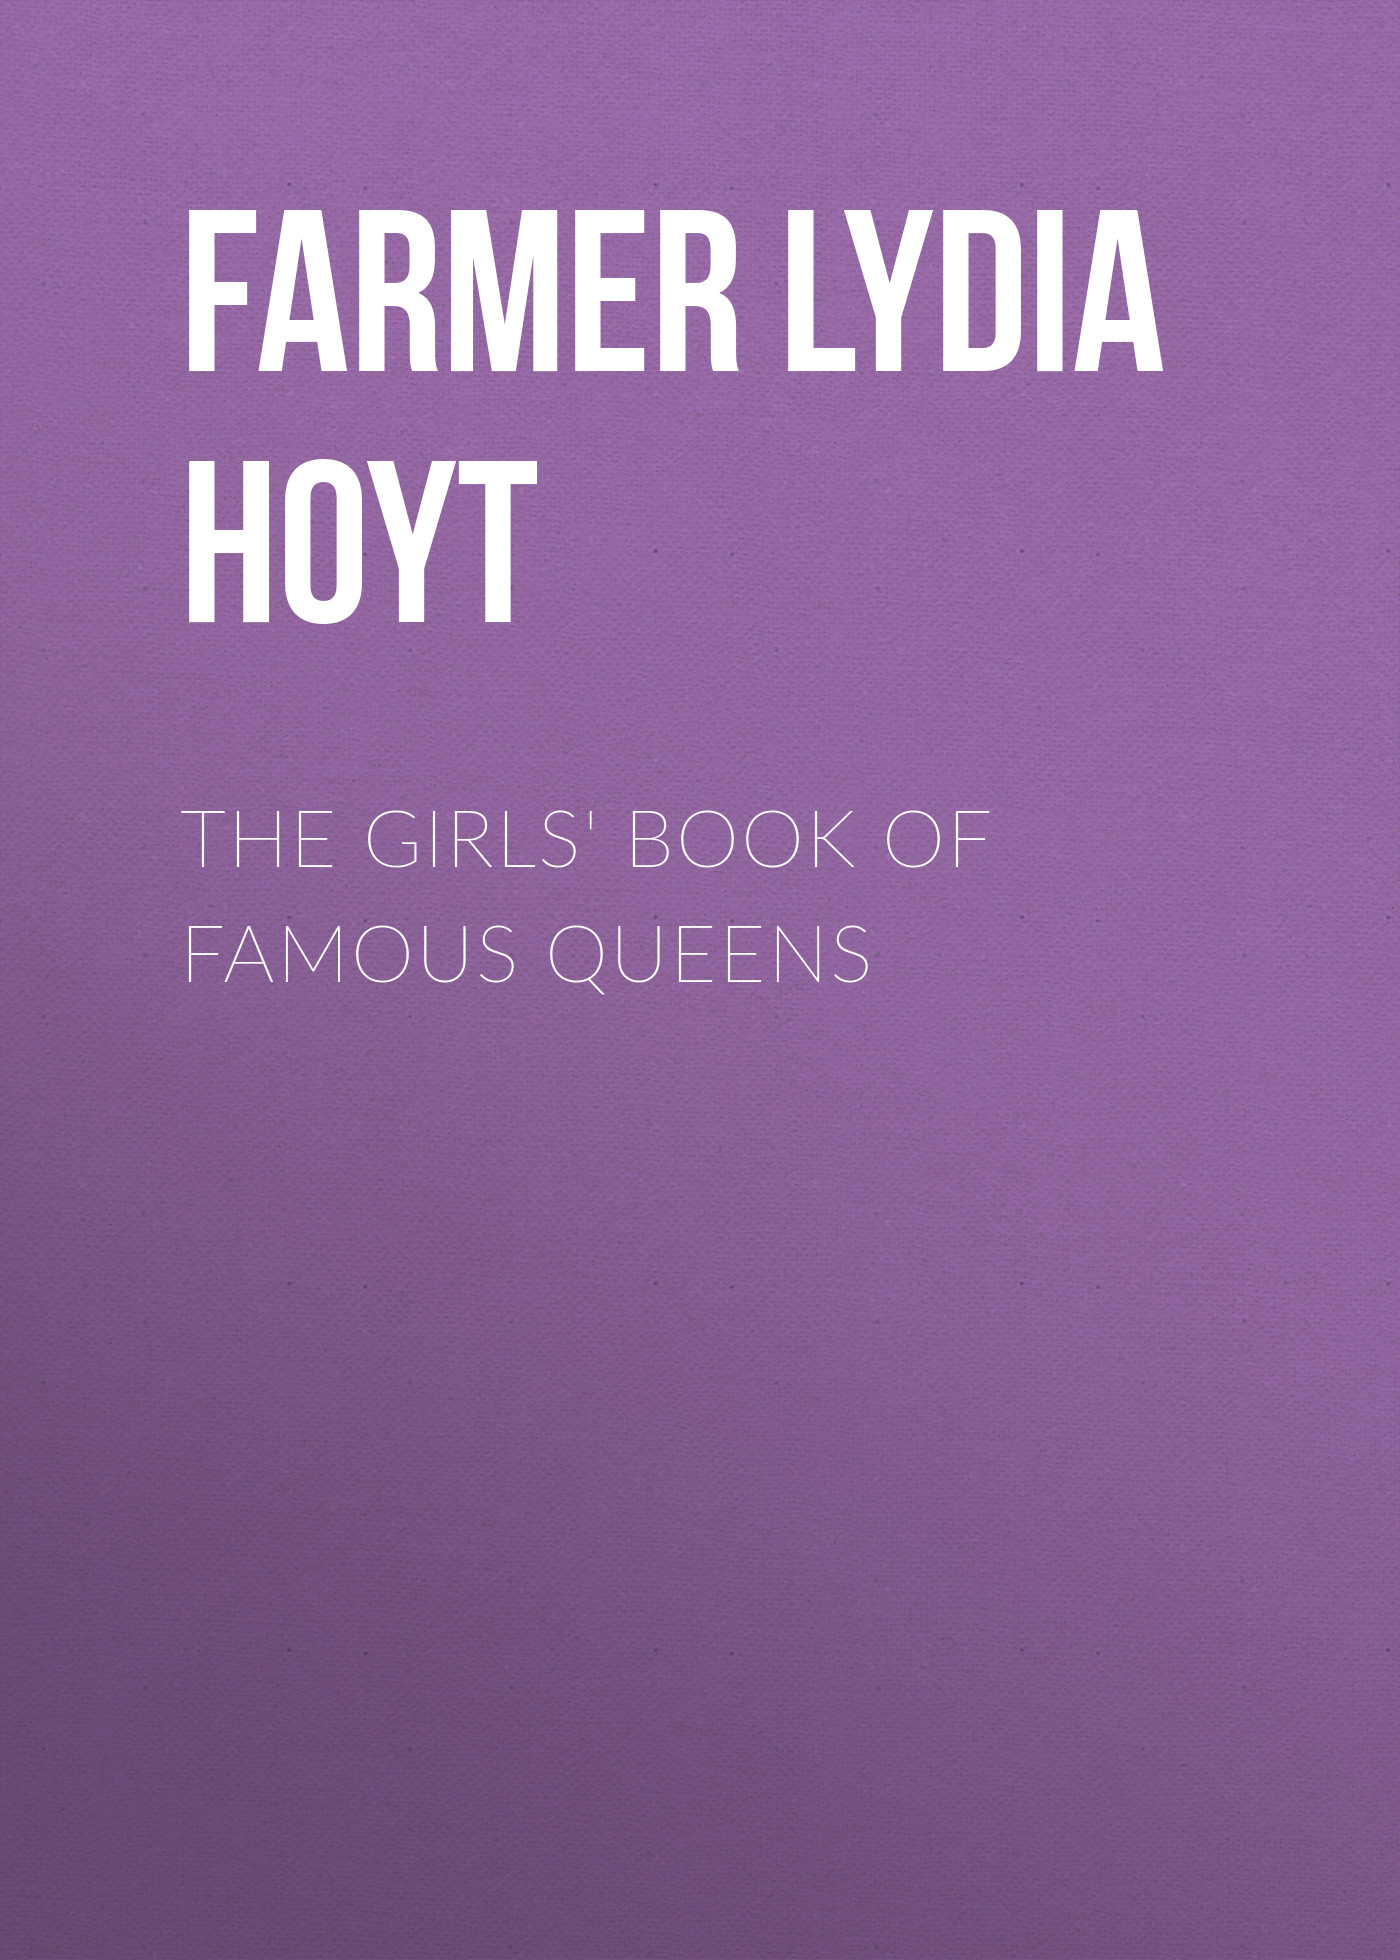 The Girls'Book of Famous Queens